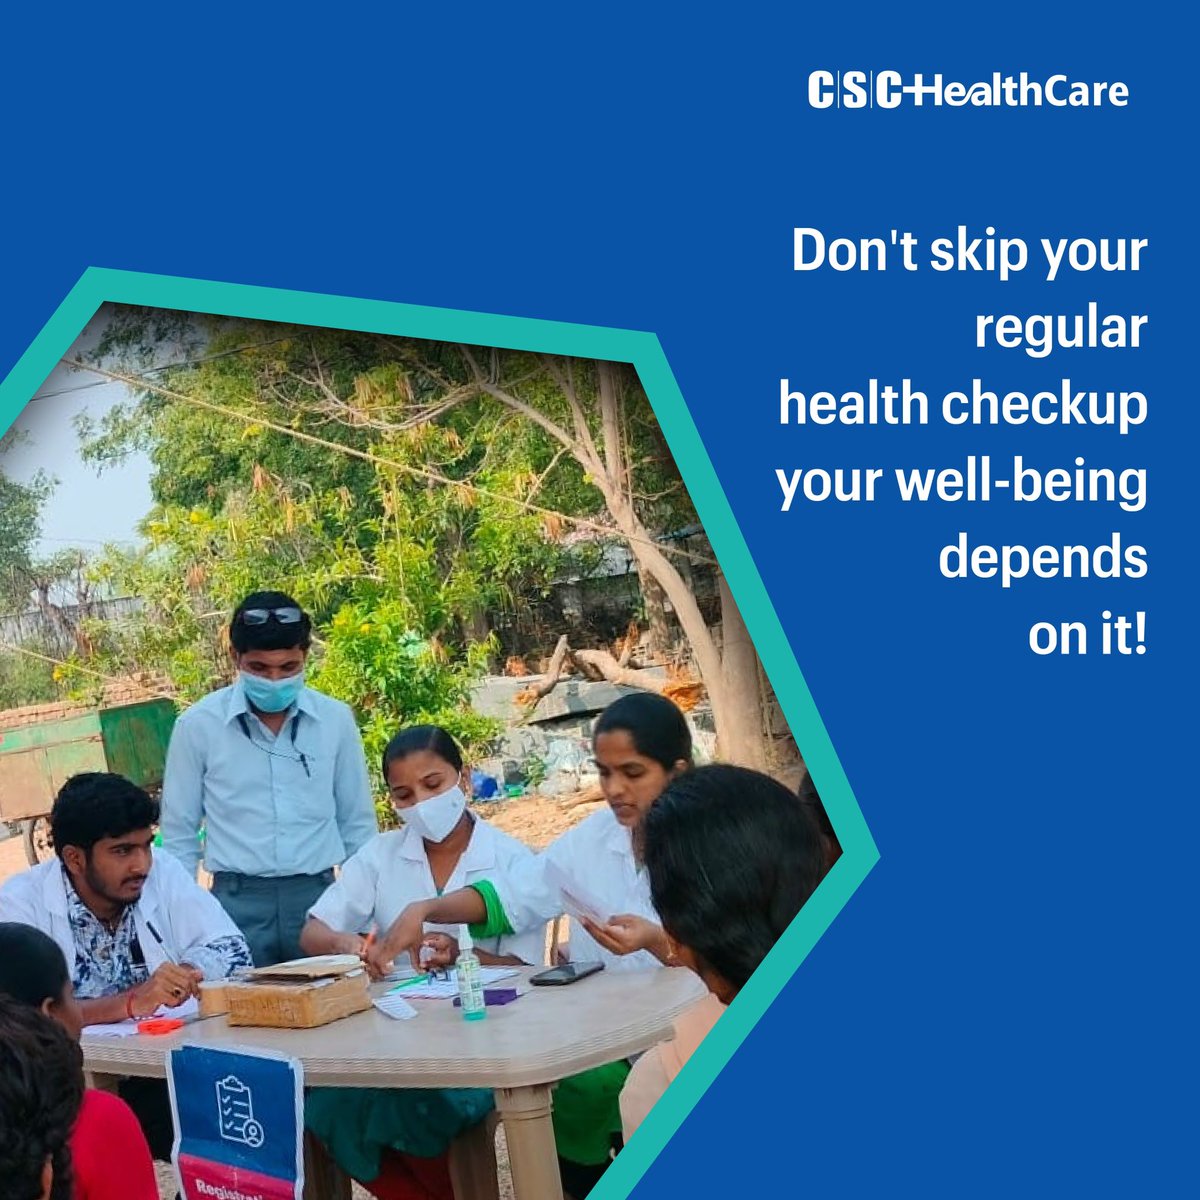 Prioritize health checkups for your well-being!
.
#ProtectYourHealth #StaySafe #DigitalIndia #DigitalSeva #cschealthcare #healthcare